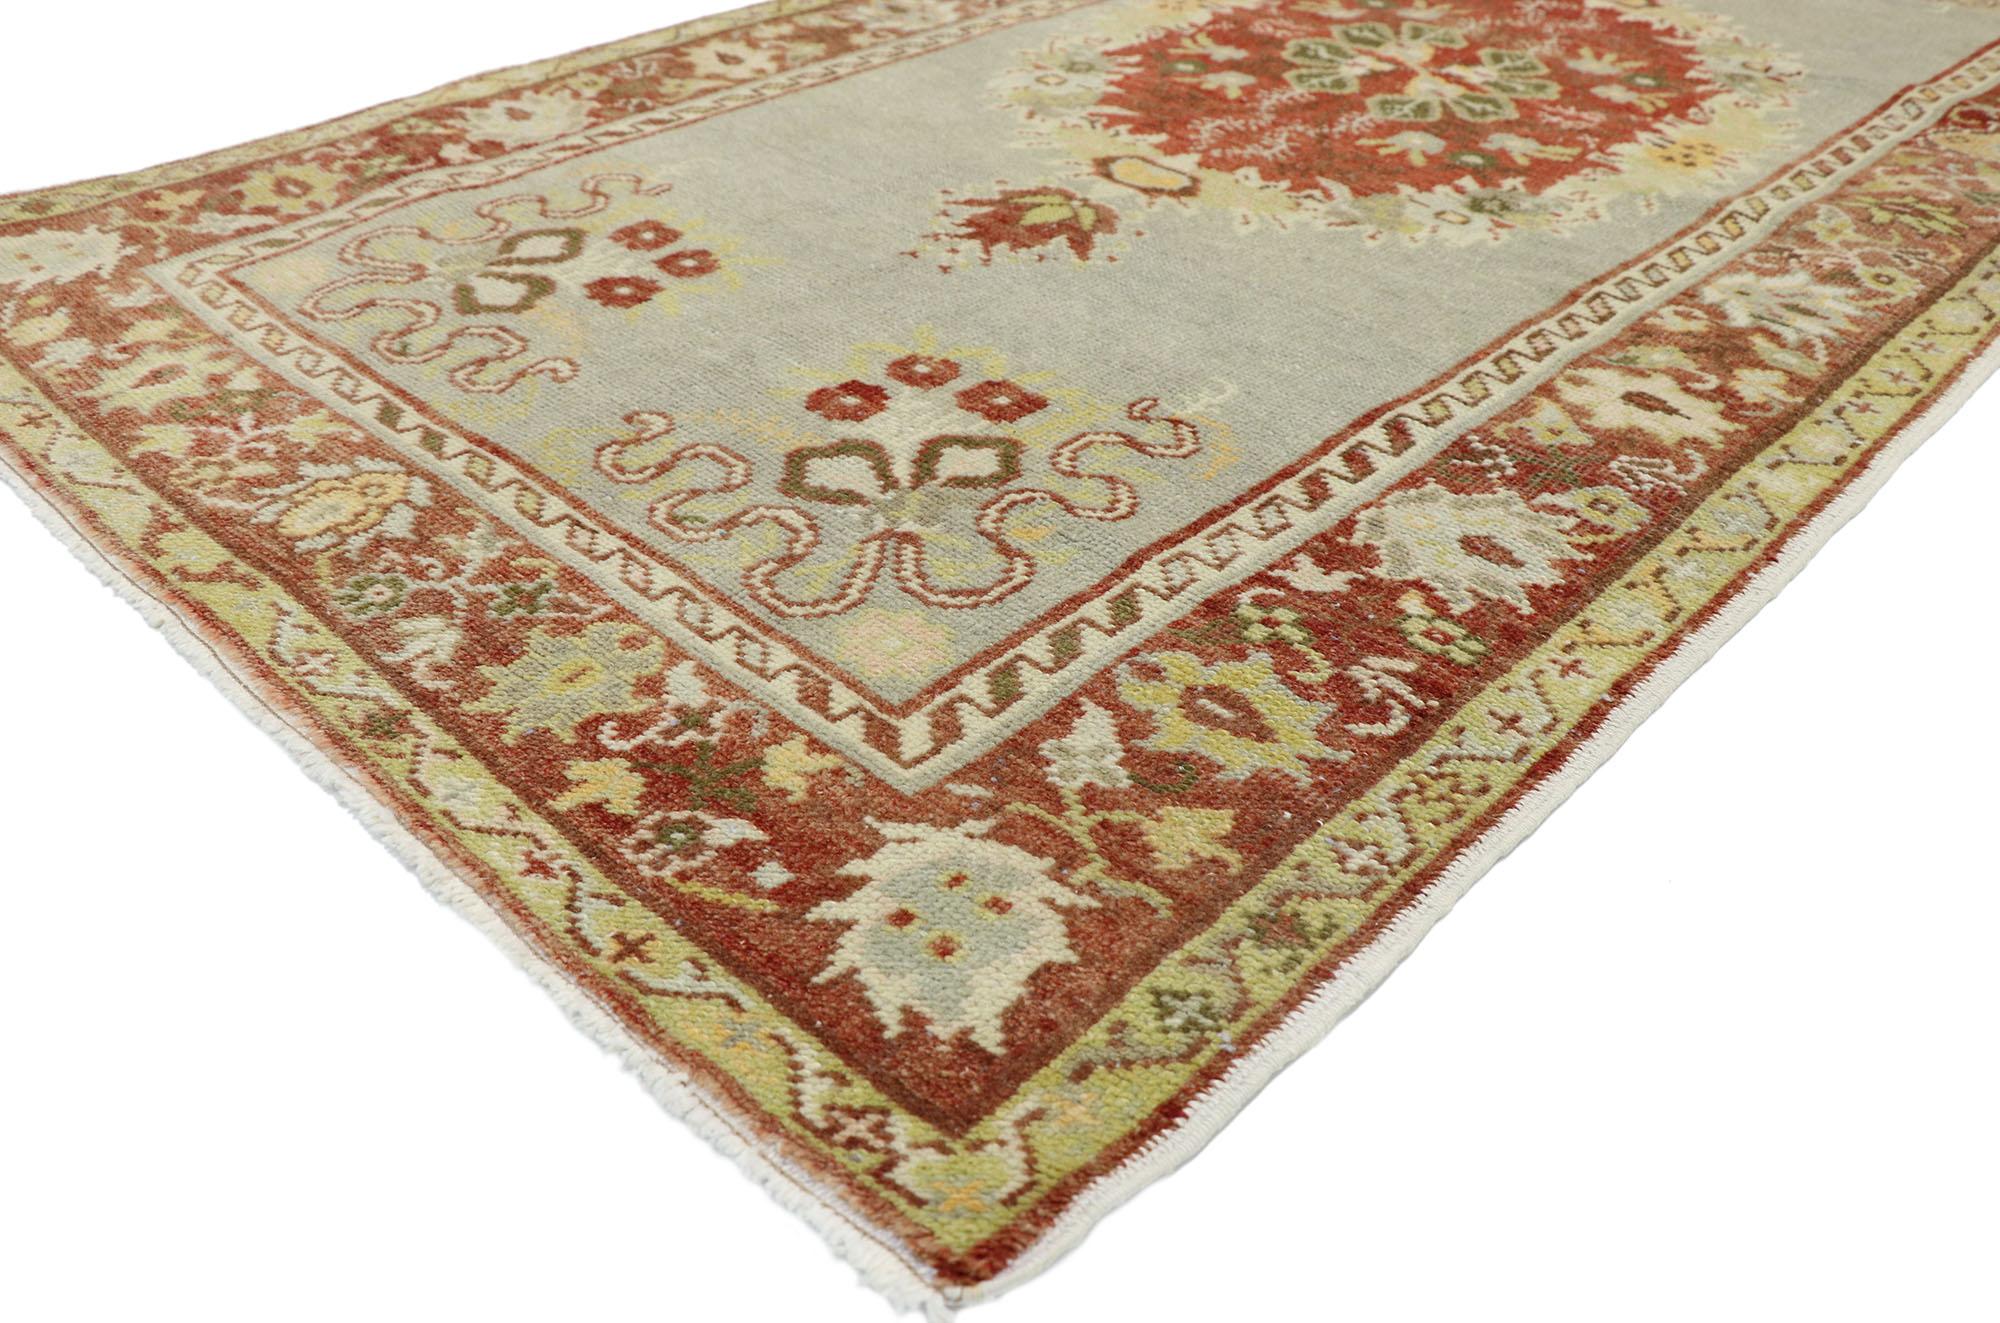 52746, distressed vintage Turkish Oushak rug with Romantic Rustic Georgian style. This hand knotted wool distressed vintage Turkish Oushak accent rug features a round central medallion filled with foliage and flowers in an open abrashed light gray